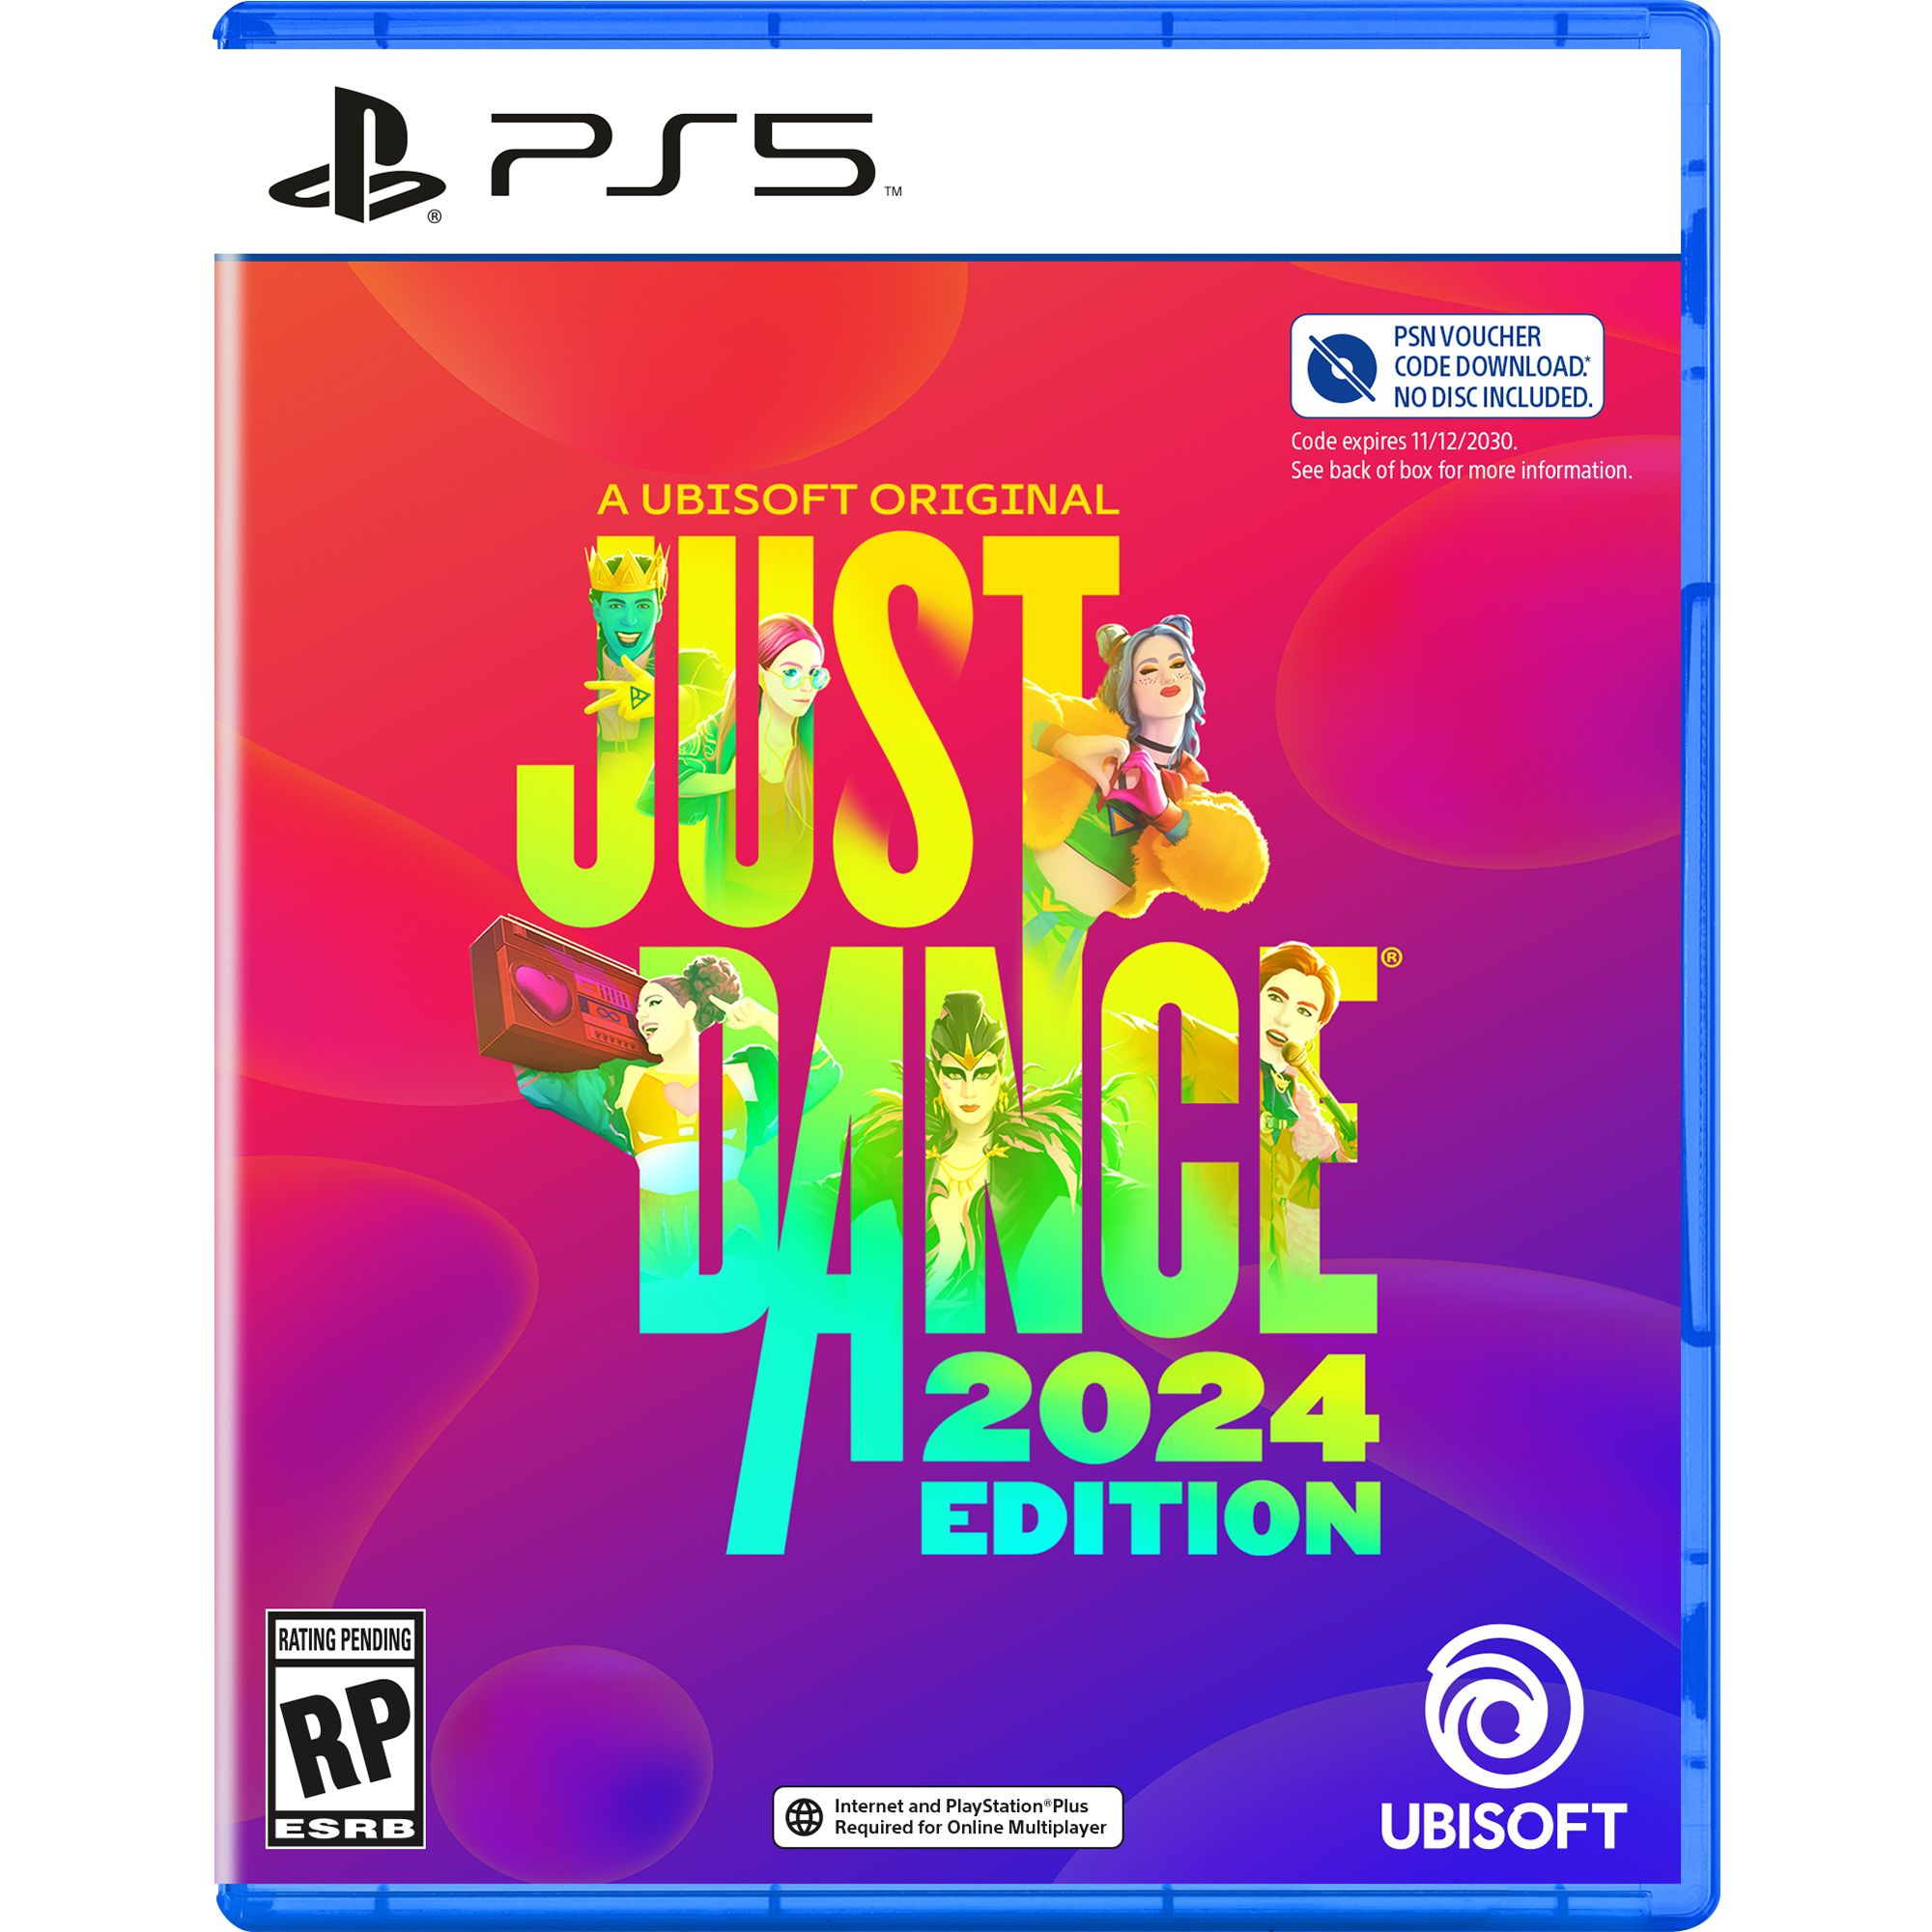 PlayStation 5 Digital Console & Just Dance 2023 (Code in Box)